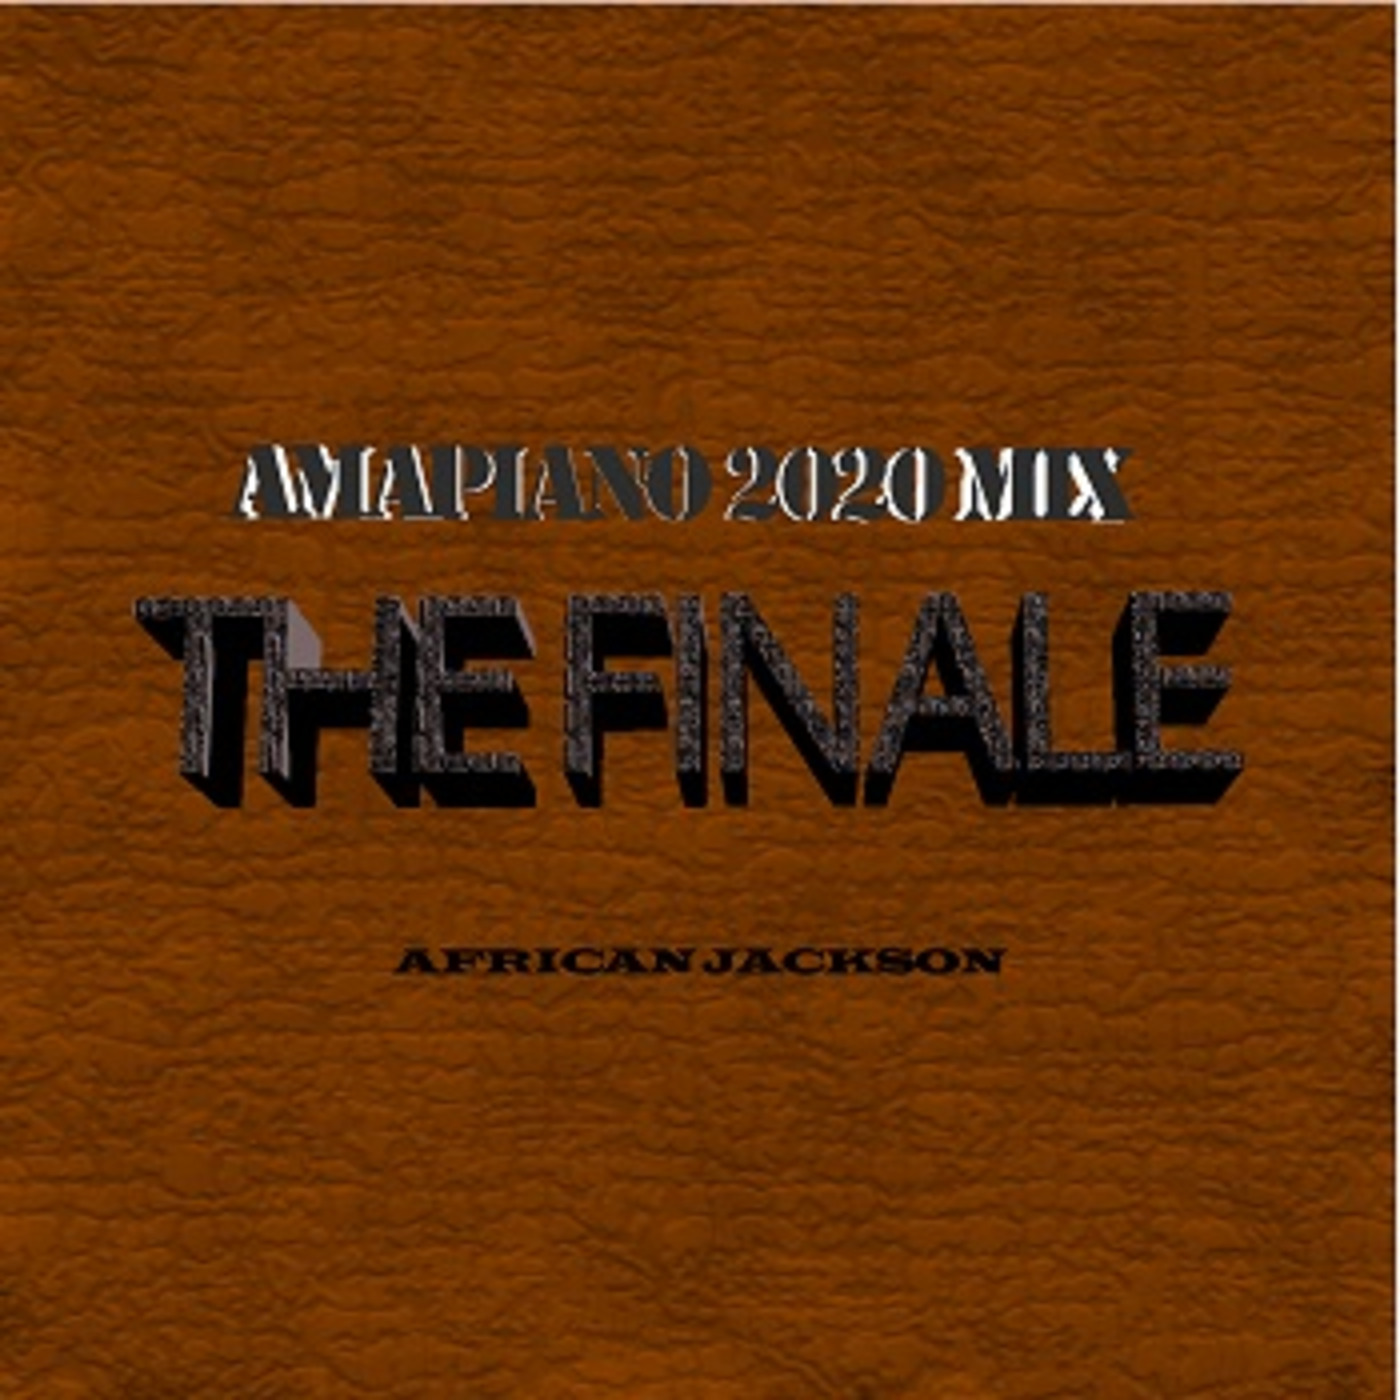 Amapiano 2020 Mix The Finale Edition by African Jackson